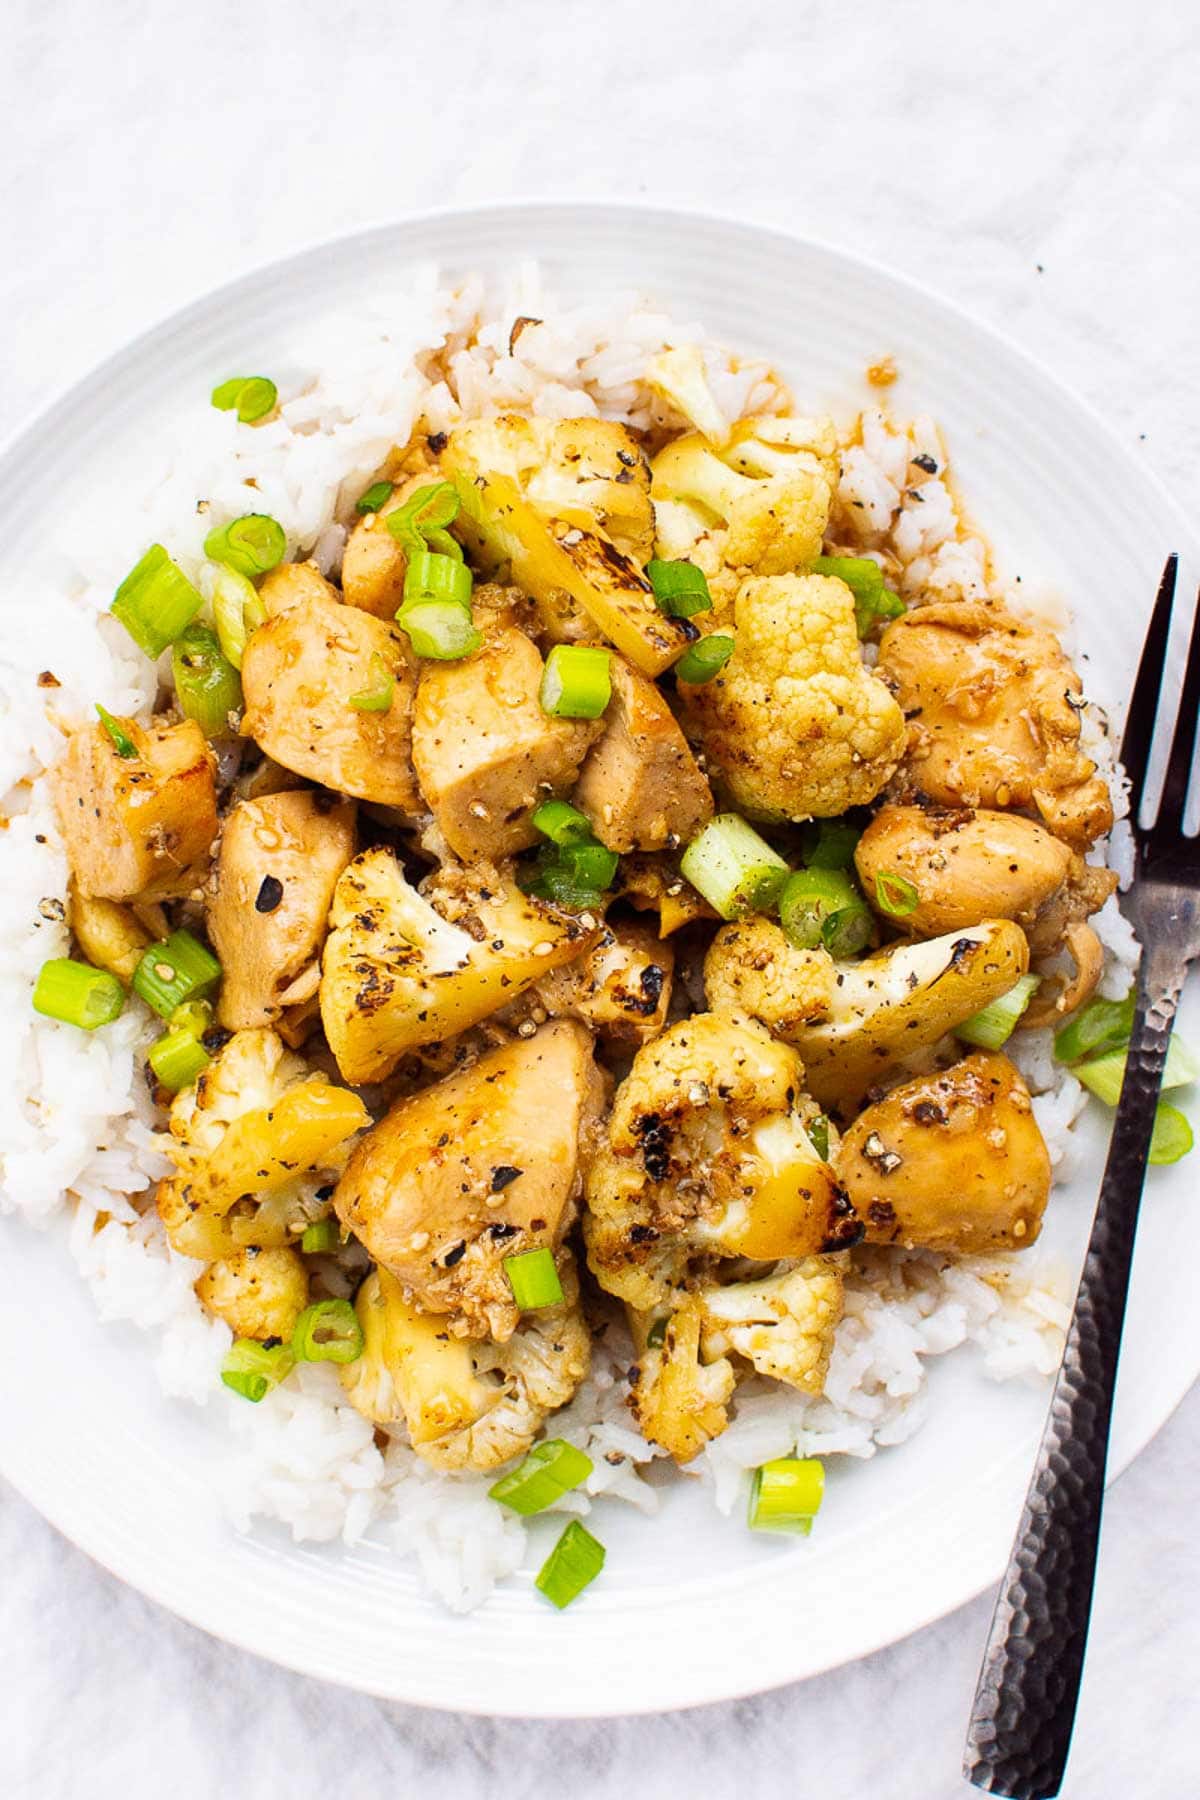 Teriyaki chicken and cauliflower garnished with green onion on a plate with fork.